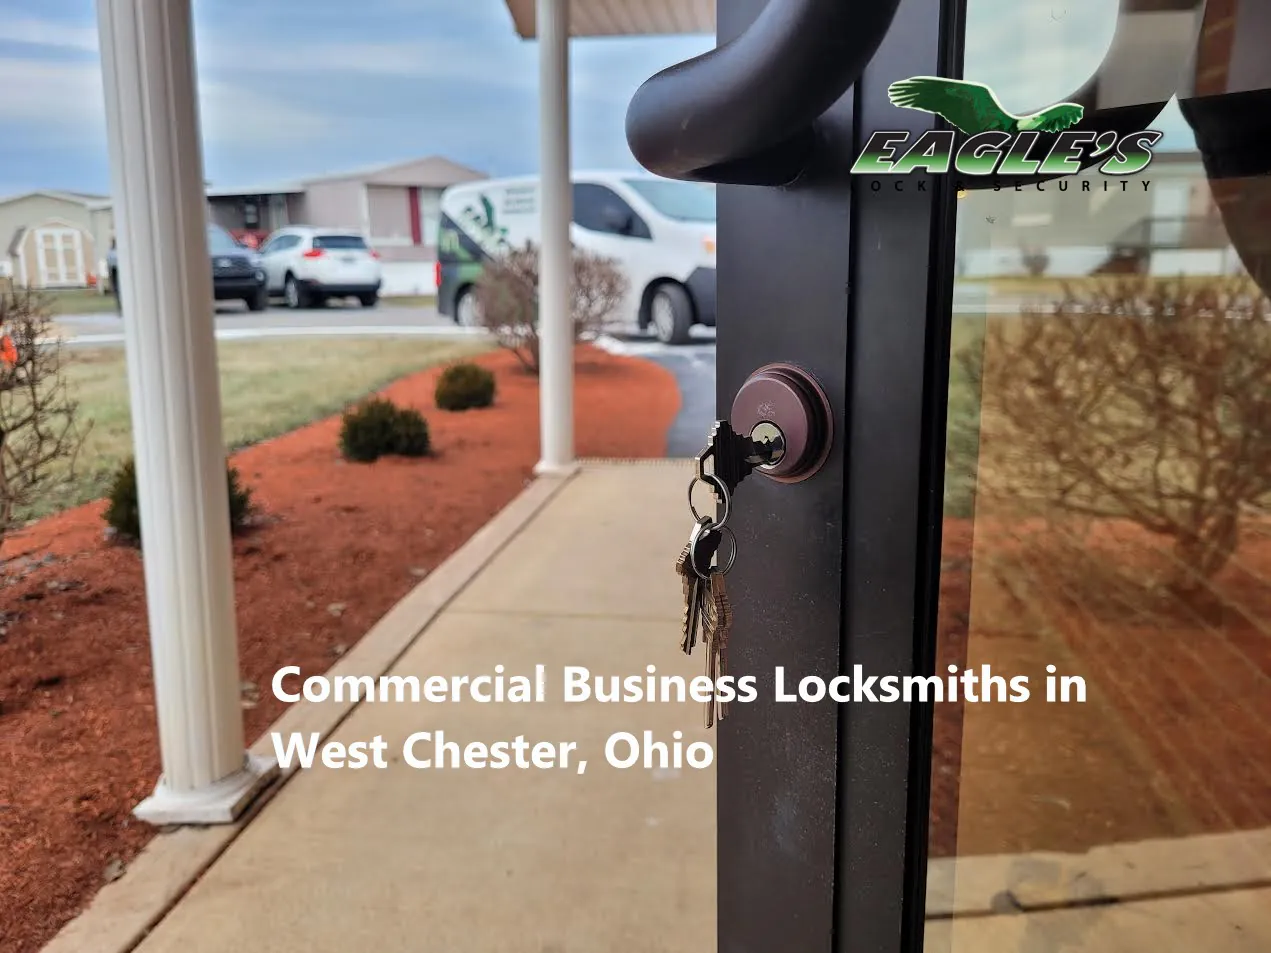 Commercial Business Locksmiths in West Chester, Ohio